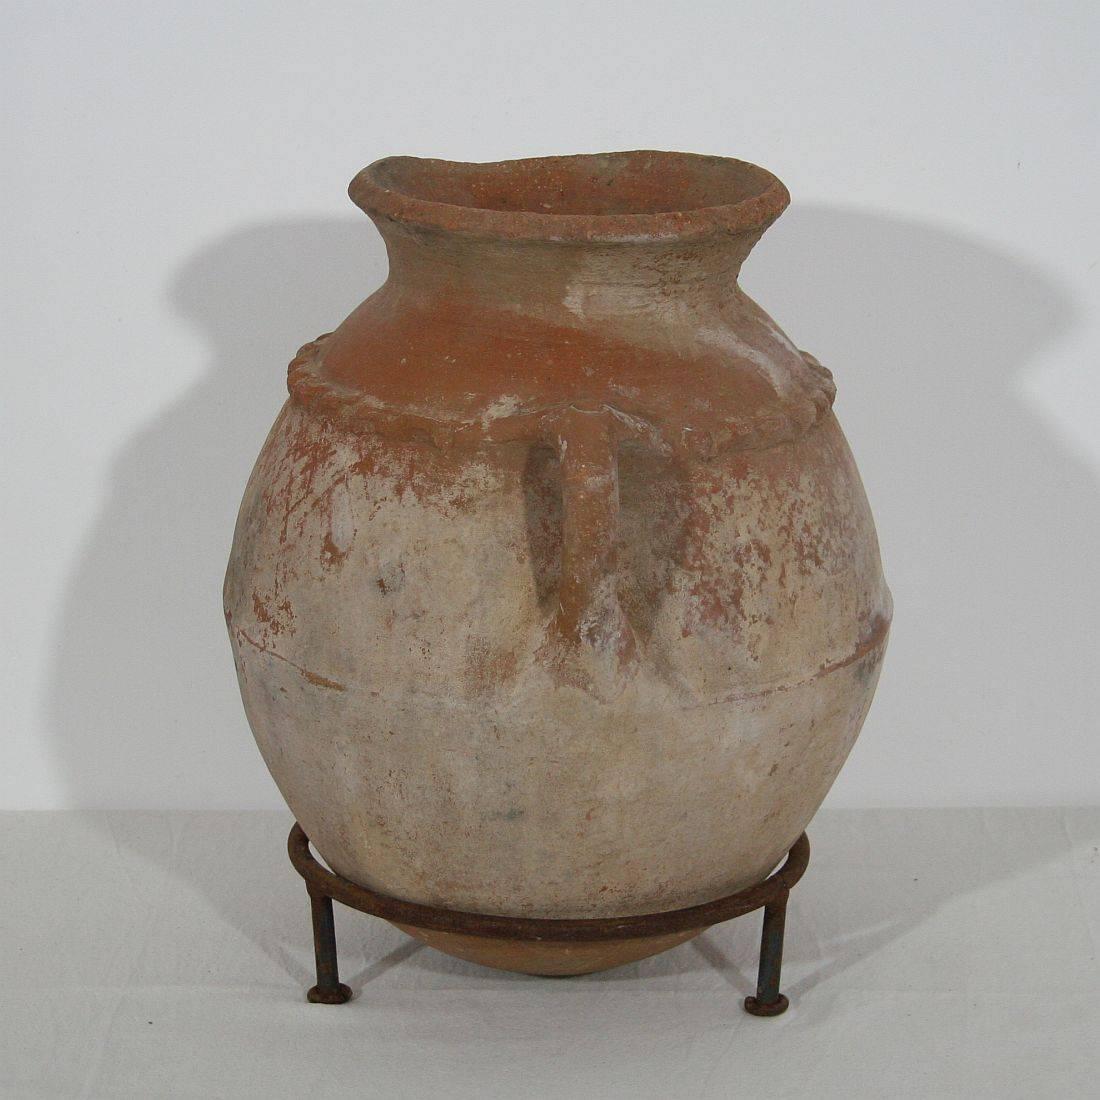 Great piece of pottery from Morocco, once used for storage.
Morocco, circa 1850
Weathered.